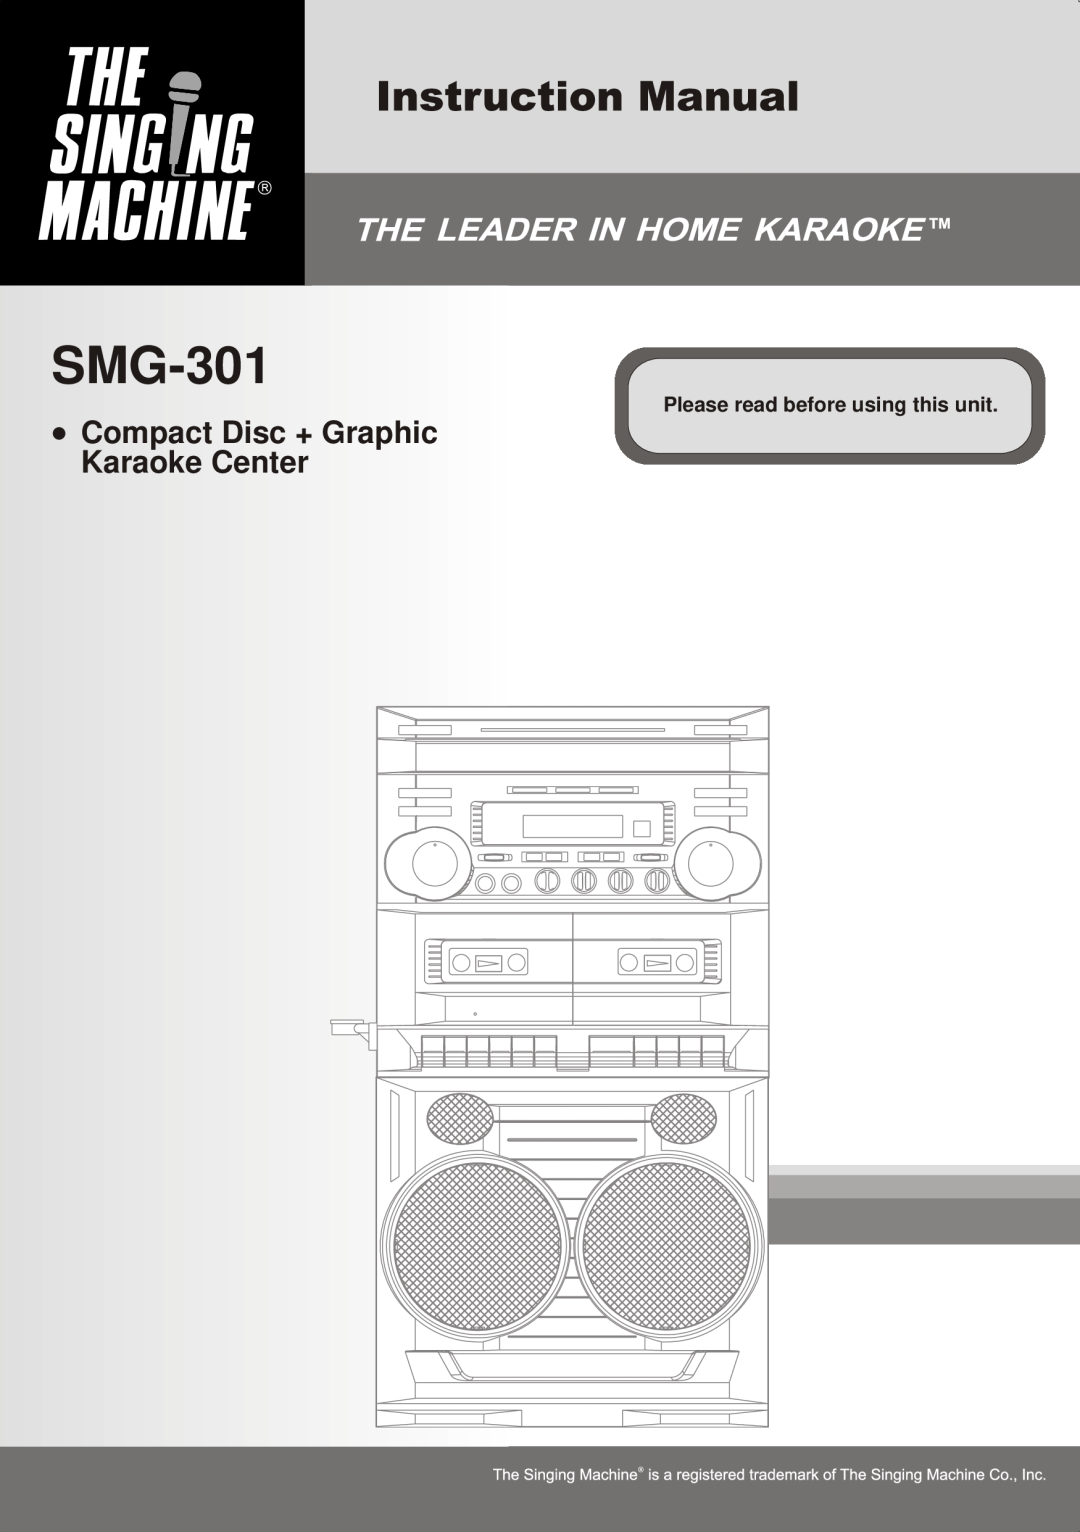 The Singing Machine SMG-301 manual Compact Disc + Graphic Karaoke Center, Please read before using this unit 